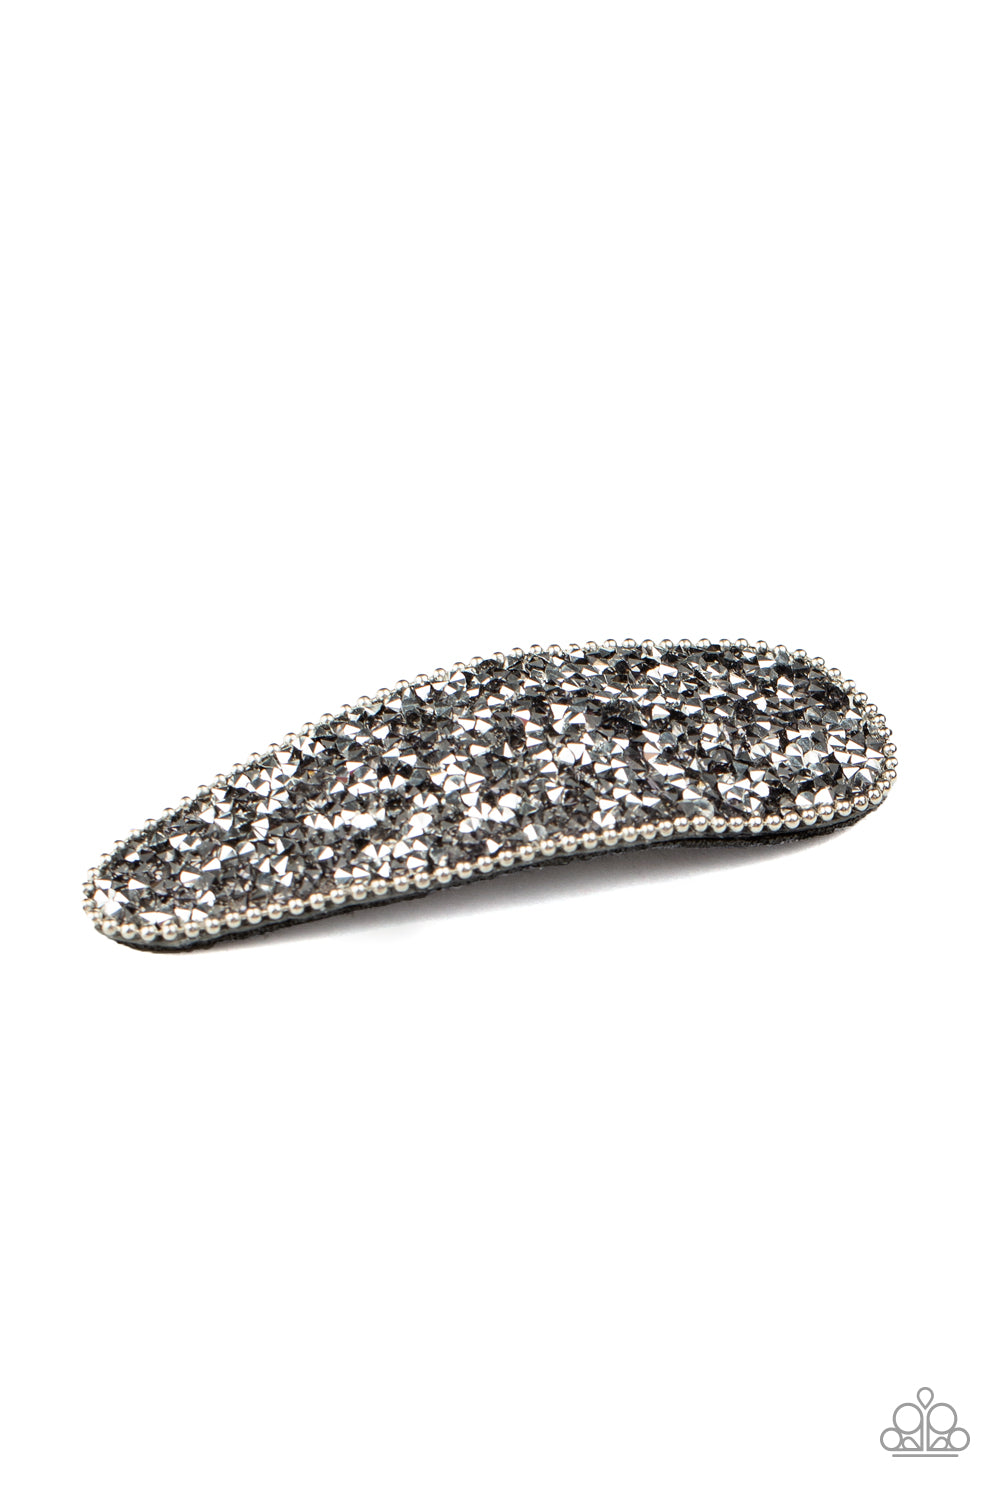 &lt;P&gt; Bordered in shiny silver ball chain, a glittery collision of hematite rhinestones are encrusted across the front of a sparkly frame for a glamorous finish. Features a standard hair clip.&lt;/P&gt;

&lt;P&gt;&lt;I&gt;Sold as one individual hair clip.  &lt;/I&gt;&lt;/P&gt;


&lt;img src=\&quot;https://d9b54x484lq62.cloudfront.net/paparazzi/shopping/images/517_tag150x115_1.png\&quot; alt=\&quot;New Kit\&quot; align=\&quot;middle\&quot; height=\&quot;50\&quot; width=\&quot;50\&quot;/&gt;